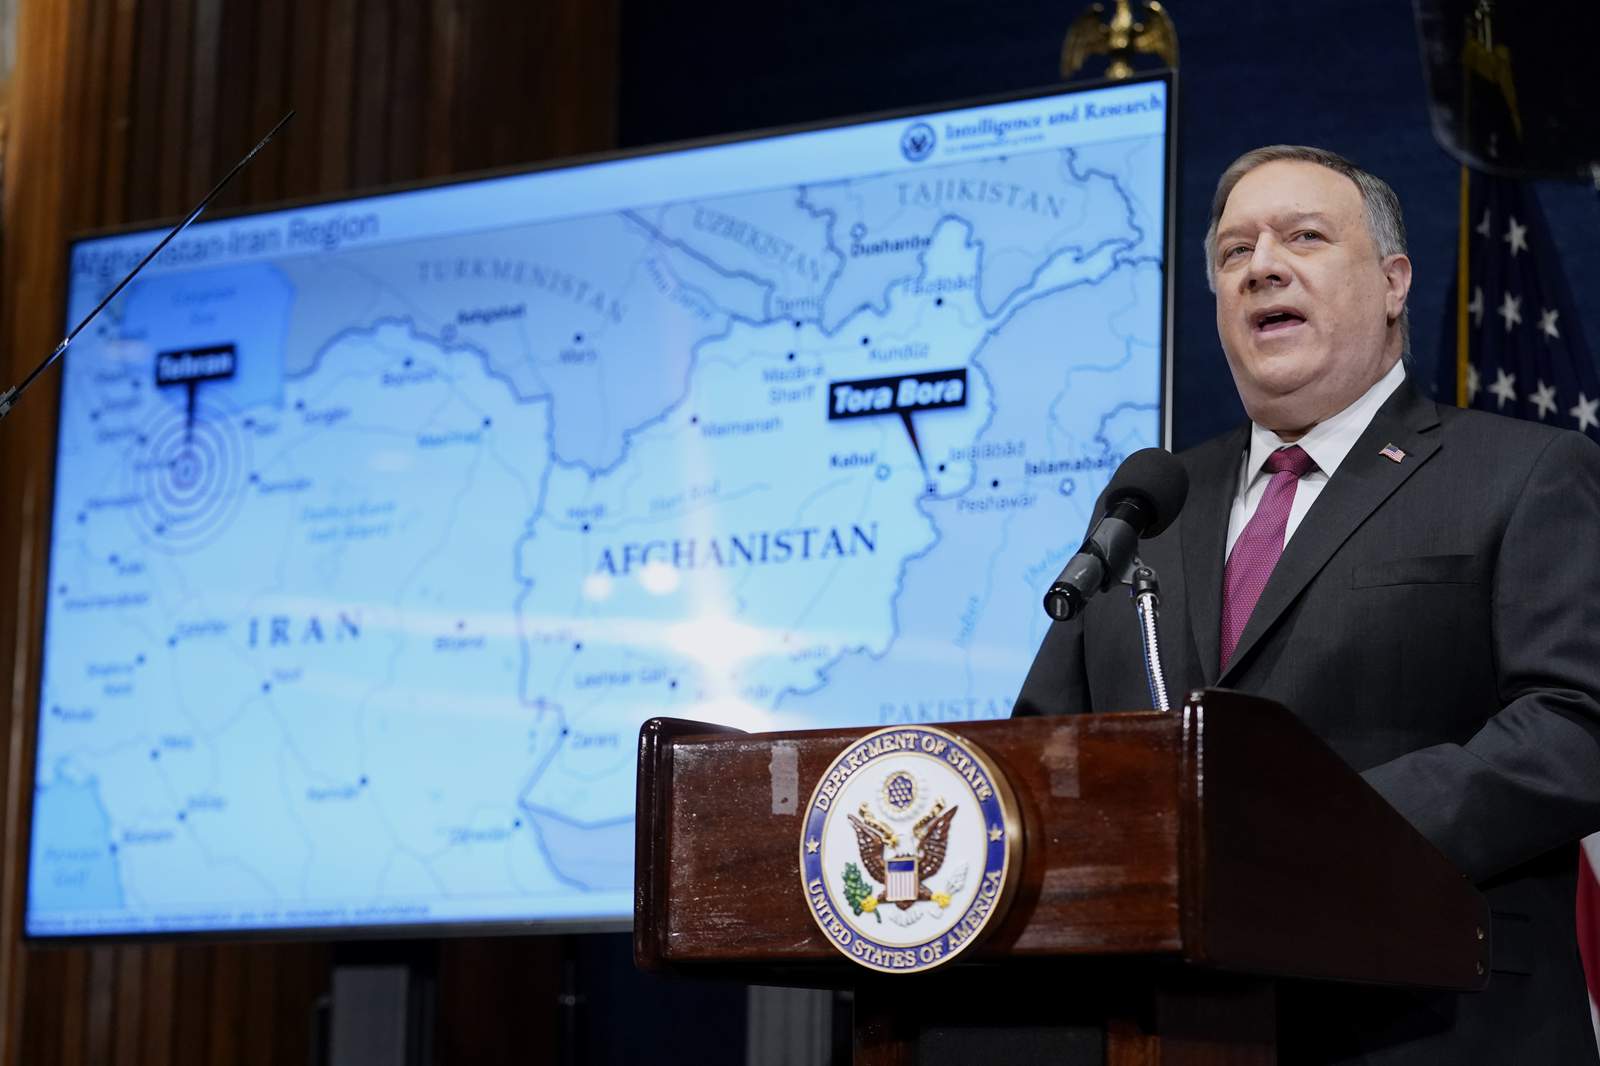 Pompeo hits Iran for al-Qaida support on his way out